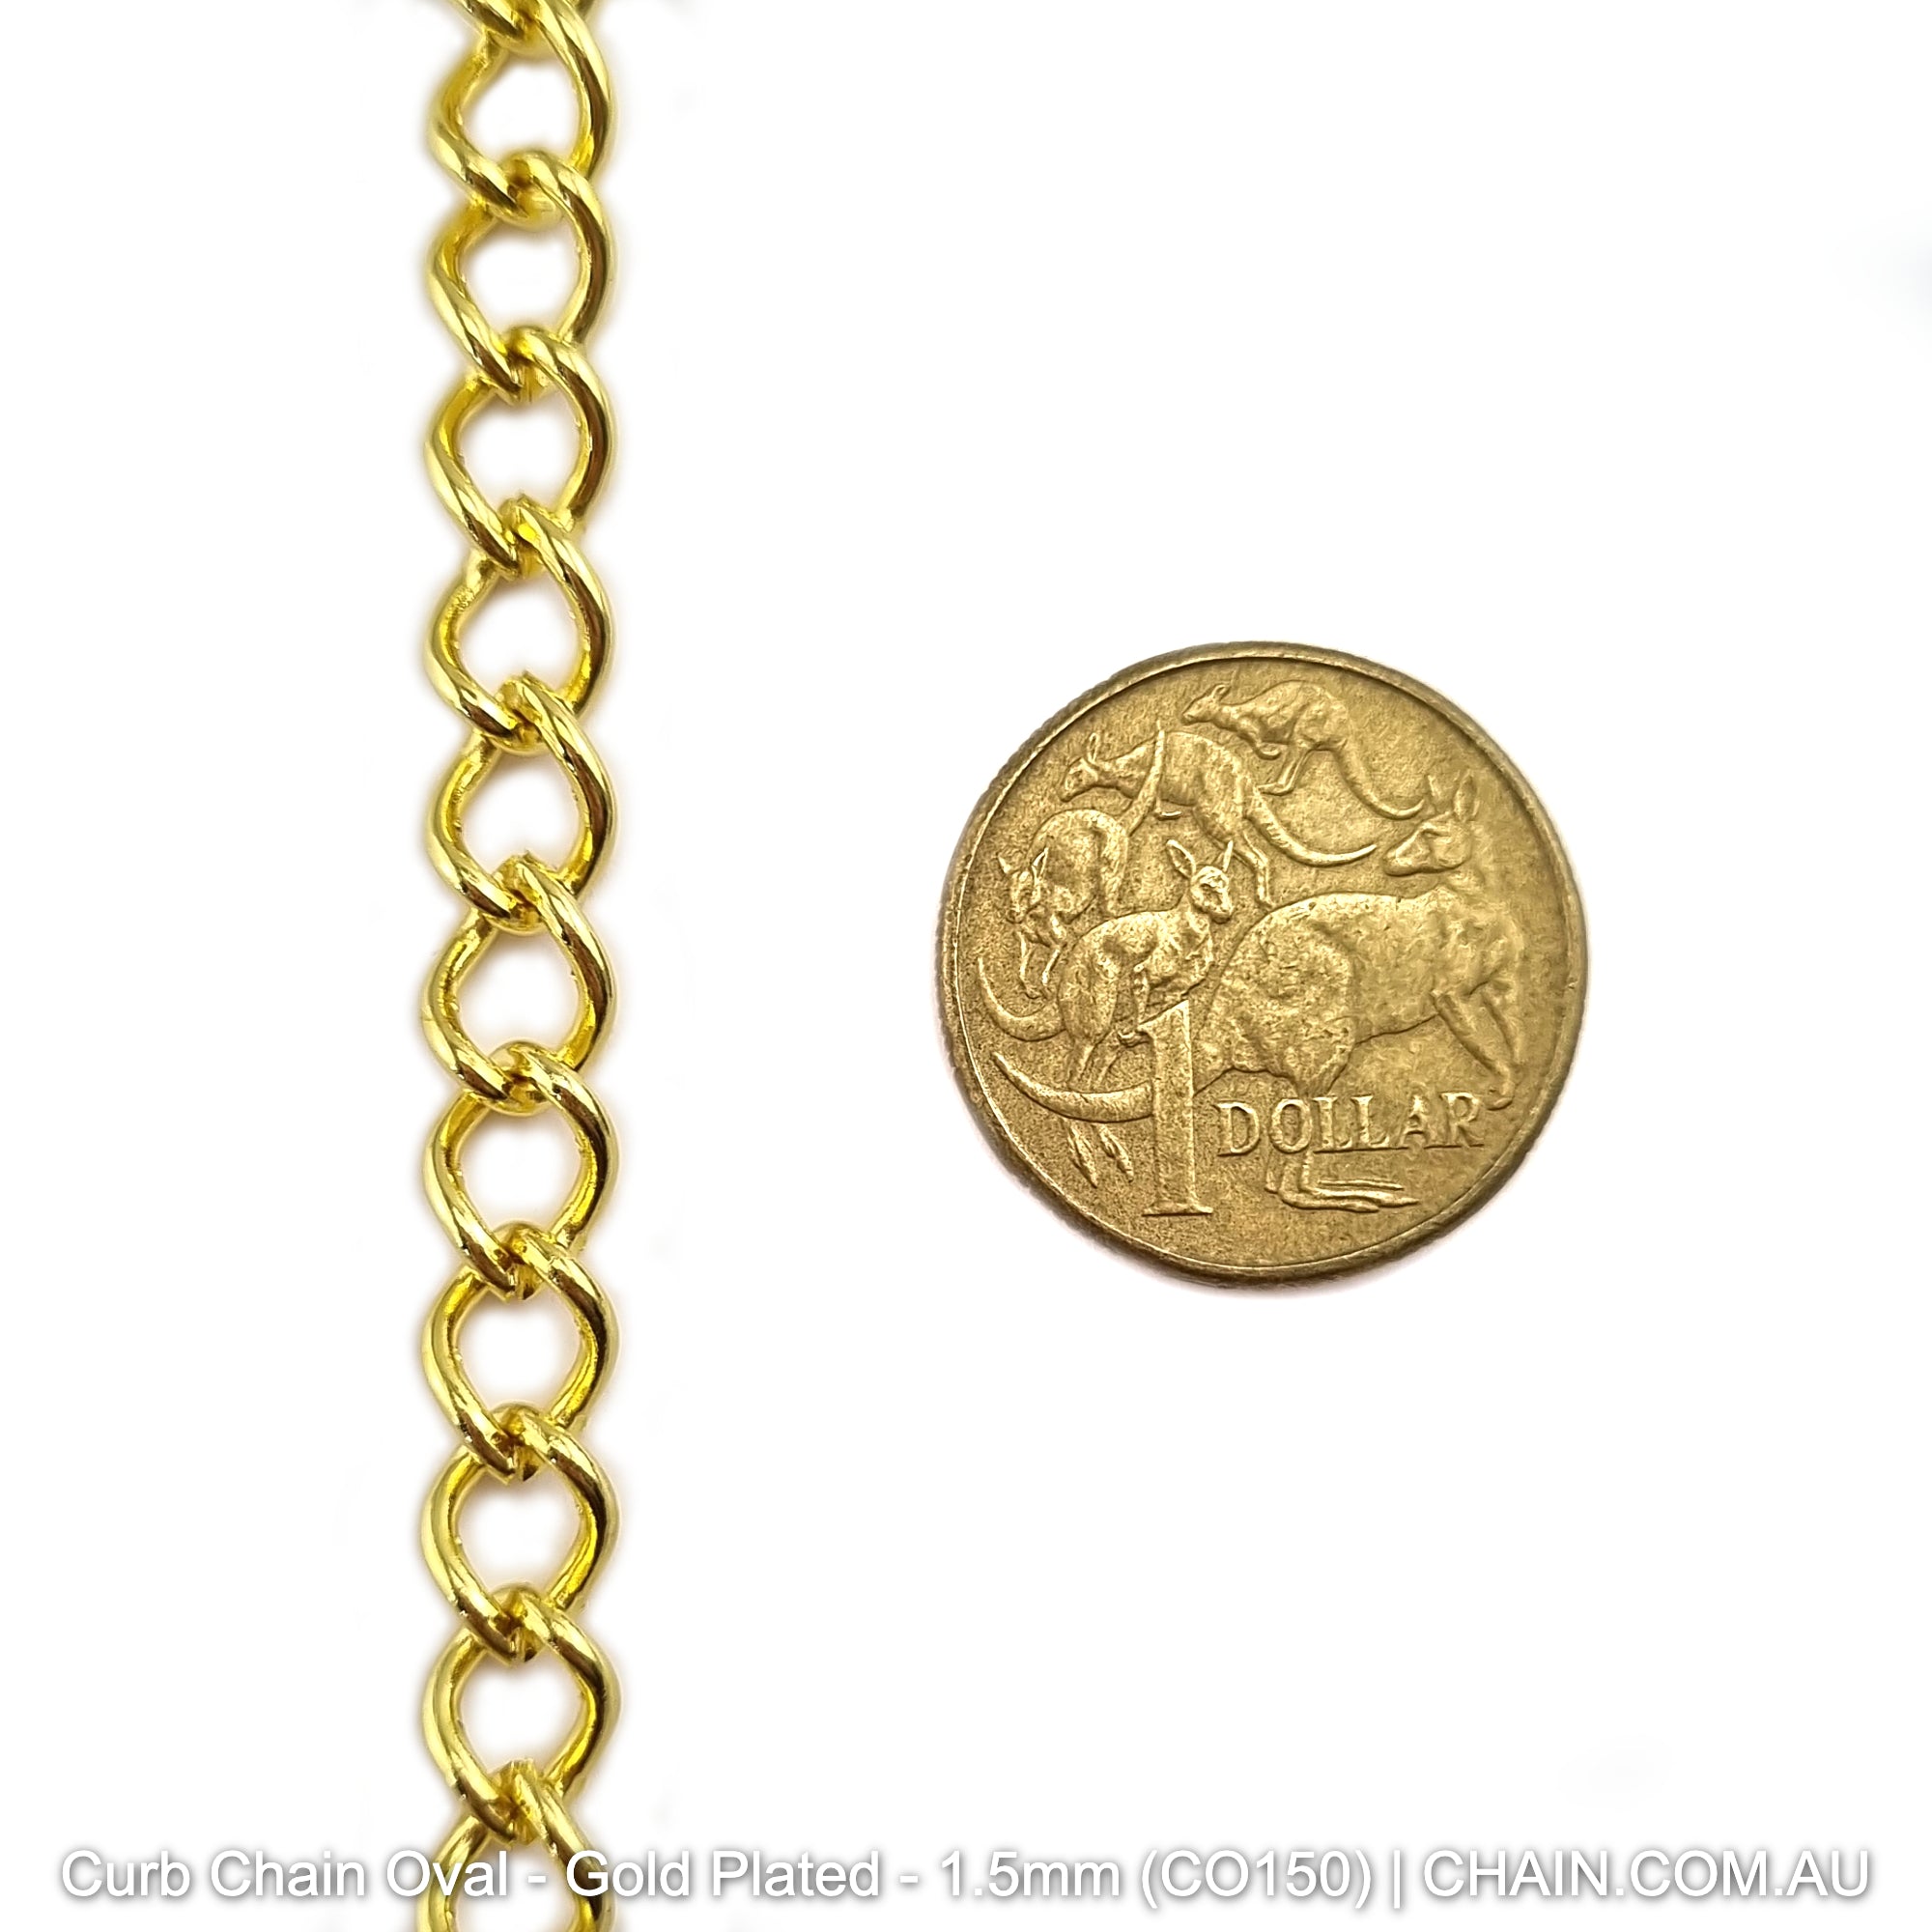 Oval Curb Chain in a Gold Plated Finish. Size: 1.5mm, CO150. Jewellery Chain, Australia wide shipping. Shop chain.com.au